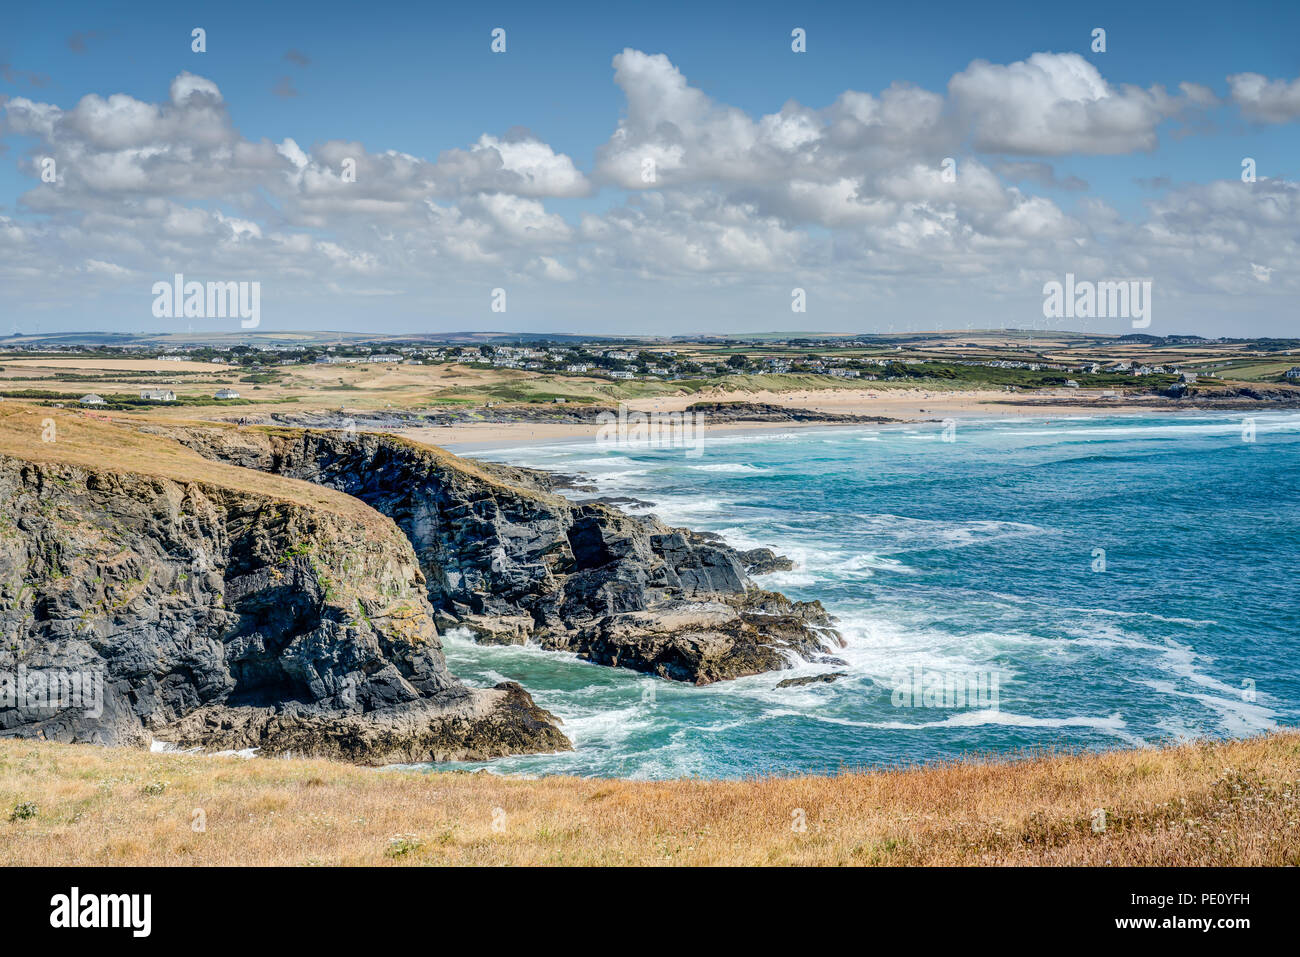 A view from Dinas Head looking back to Booby's Bay and Contantine beach on a beautiful sunny day. Blue Atlantic sea breaking on the rugged coastline. Stock Photo